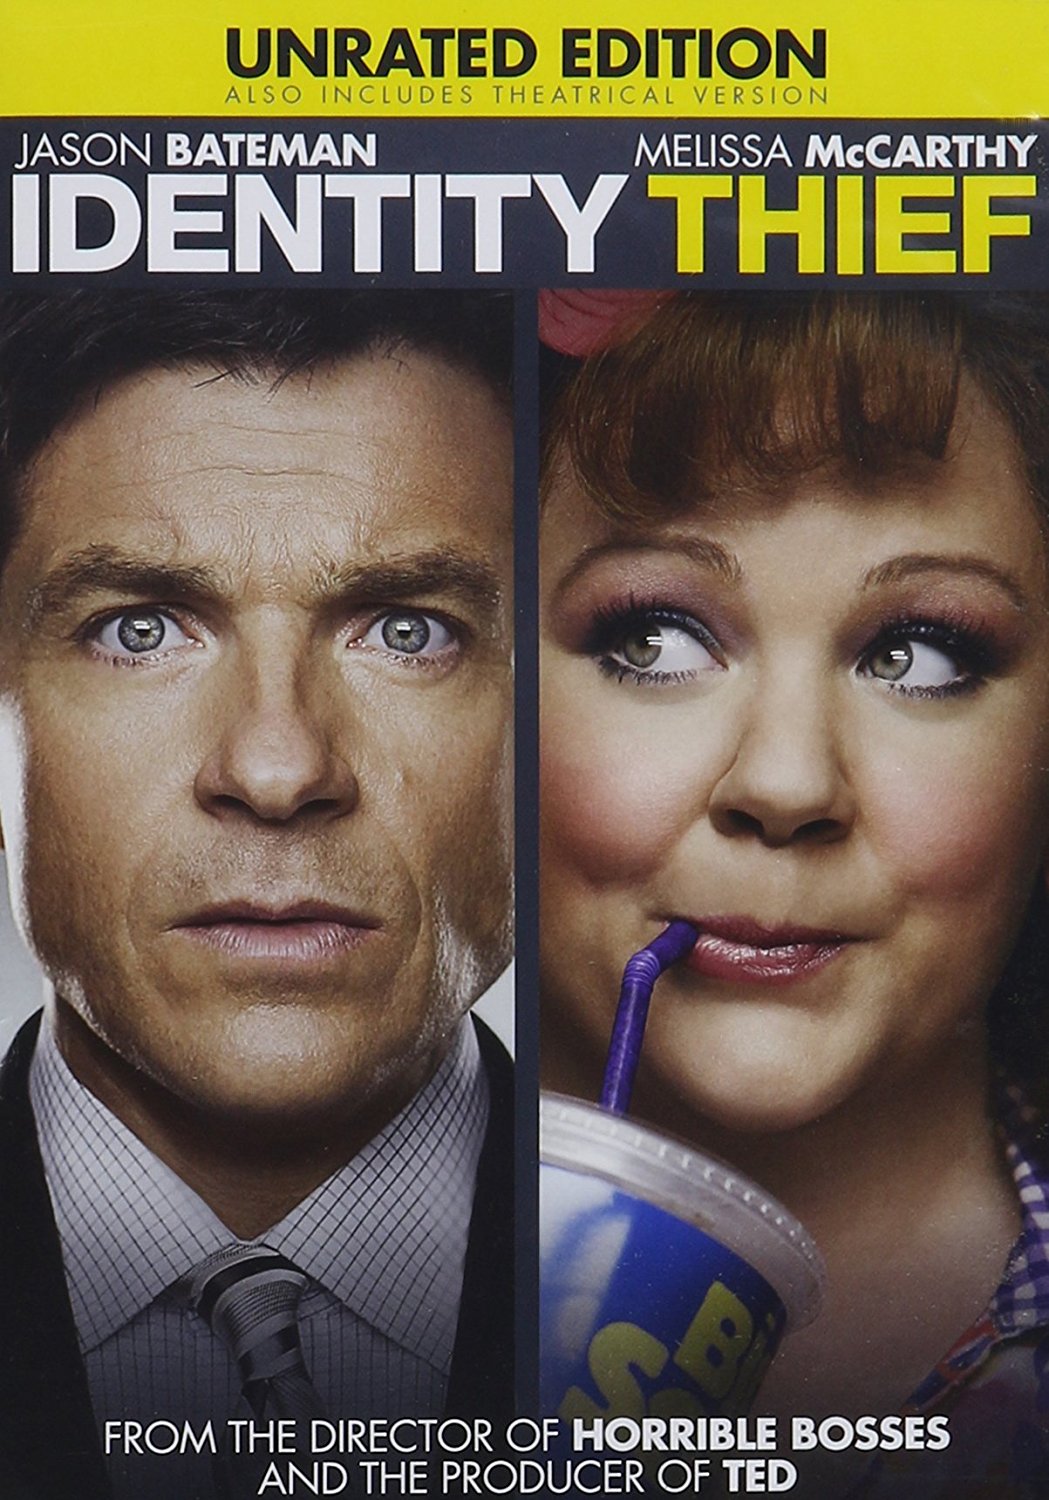 Identity Thief (Unrated) (DVD), Universal Studios, Comedy - image 4 of 5